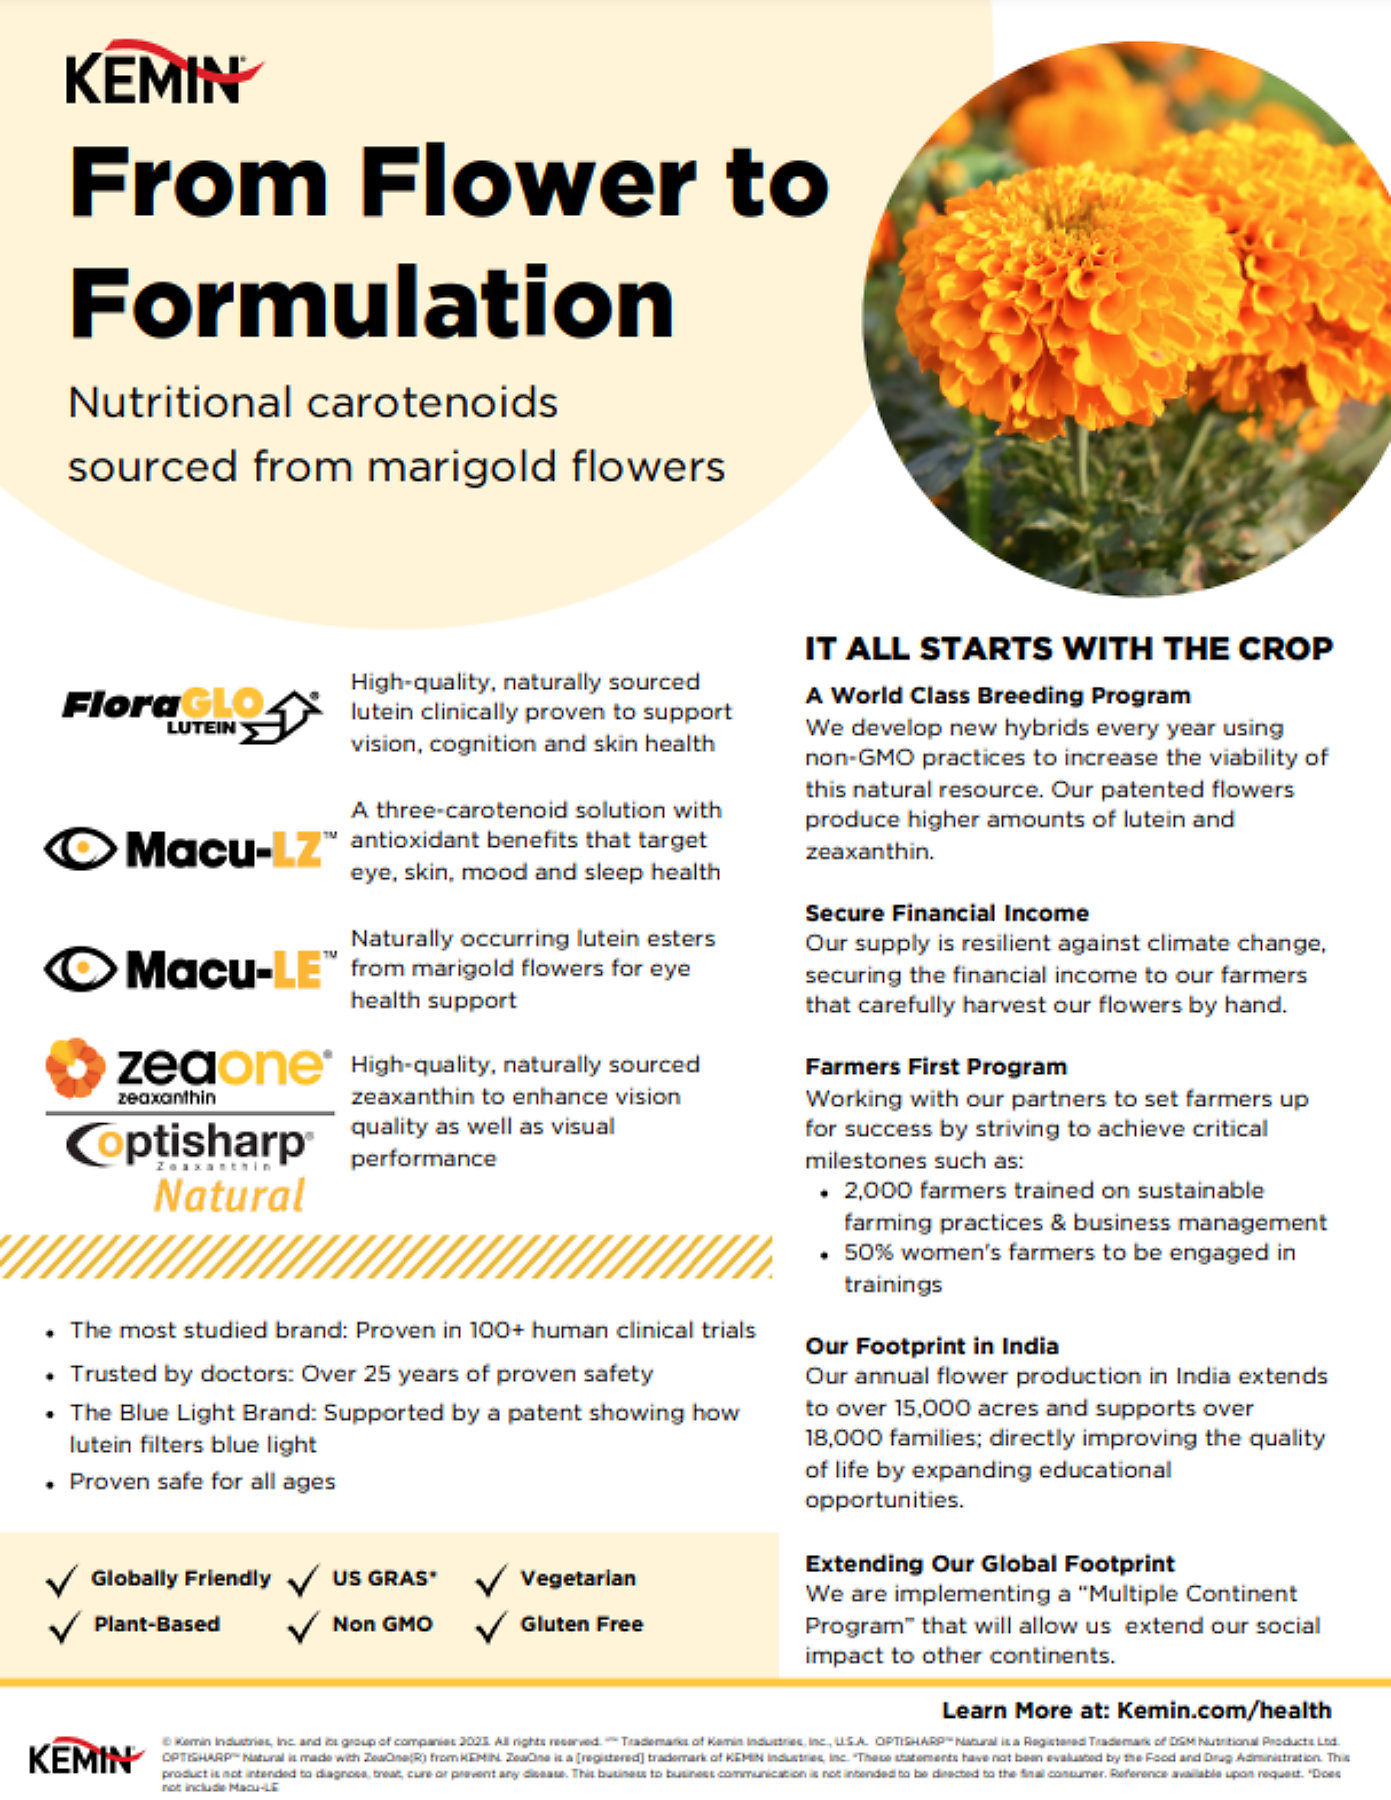 From Flower to Formulation - 4